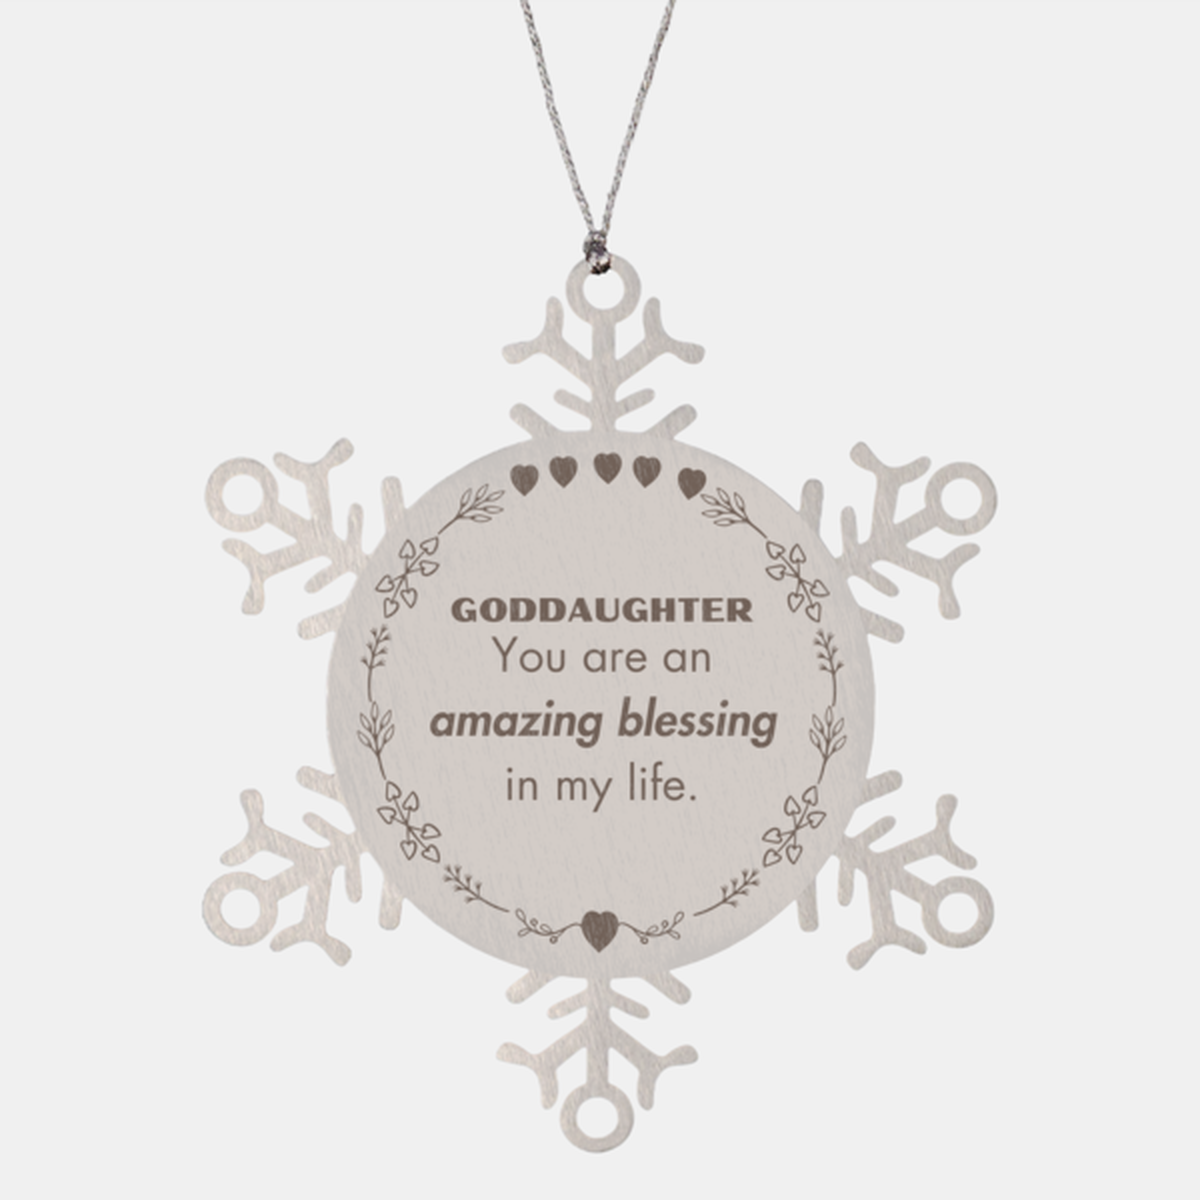 Goddaughter Snowflake Ornament, You are an amazing blessing in my life, Thank You Gifts For Goddaughter, Inspirational Birthday Christmas Unique Gifts For Goddaughter